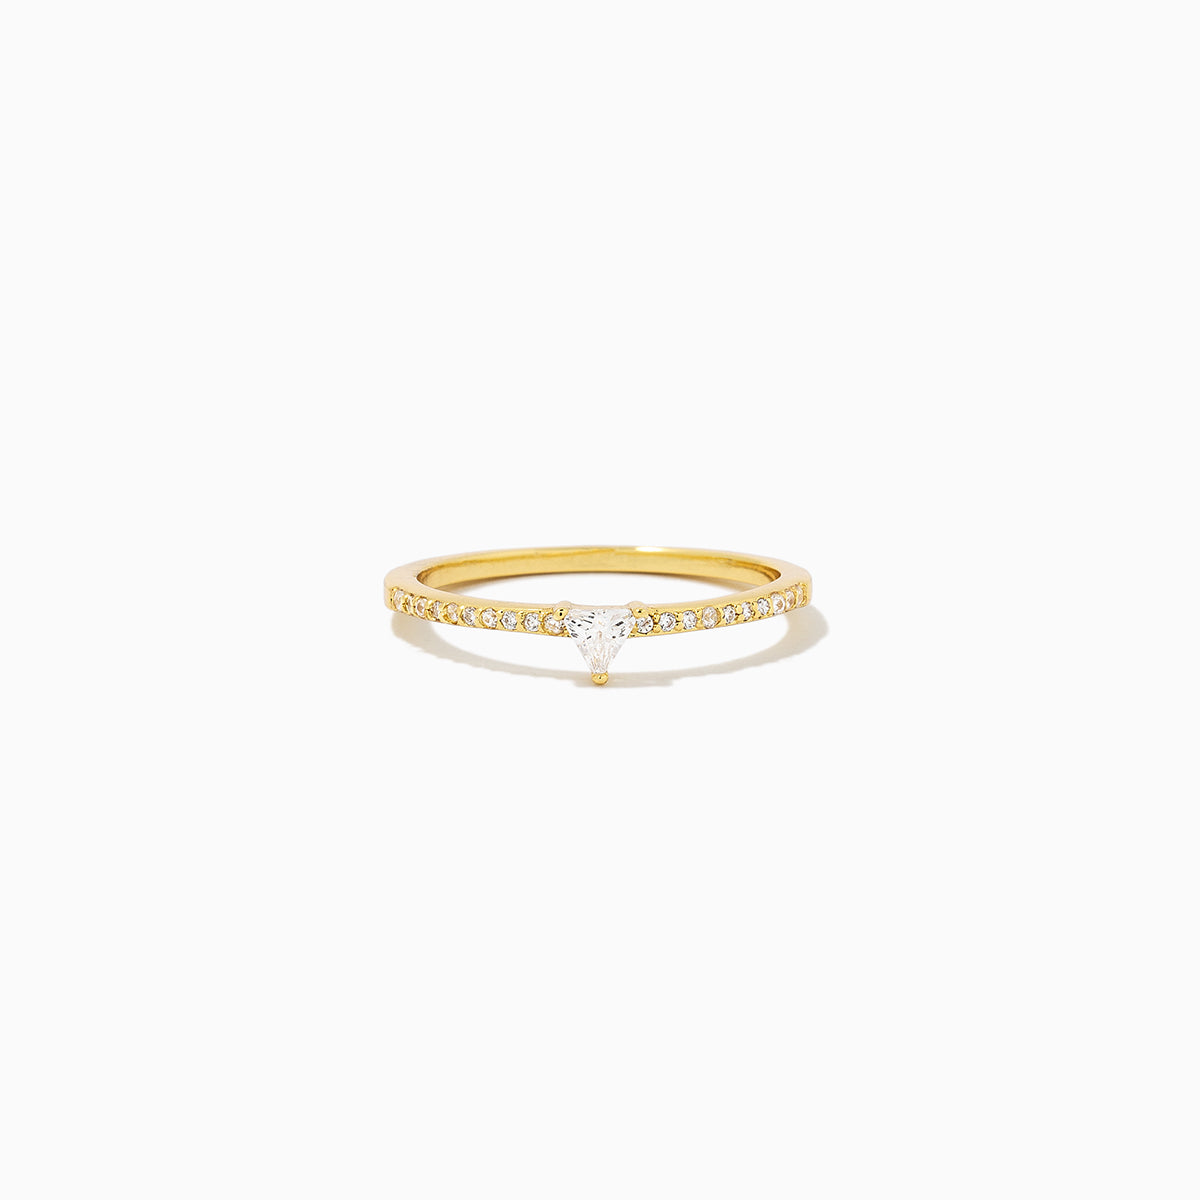 Three Points Ring | Gold | Product Image | Uncommon James